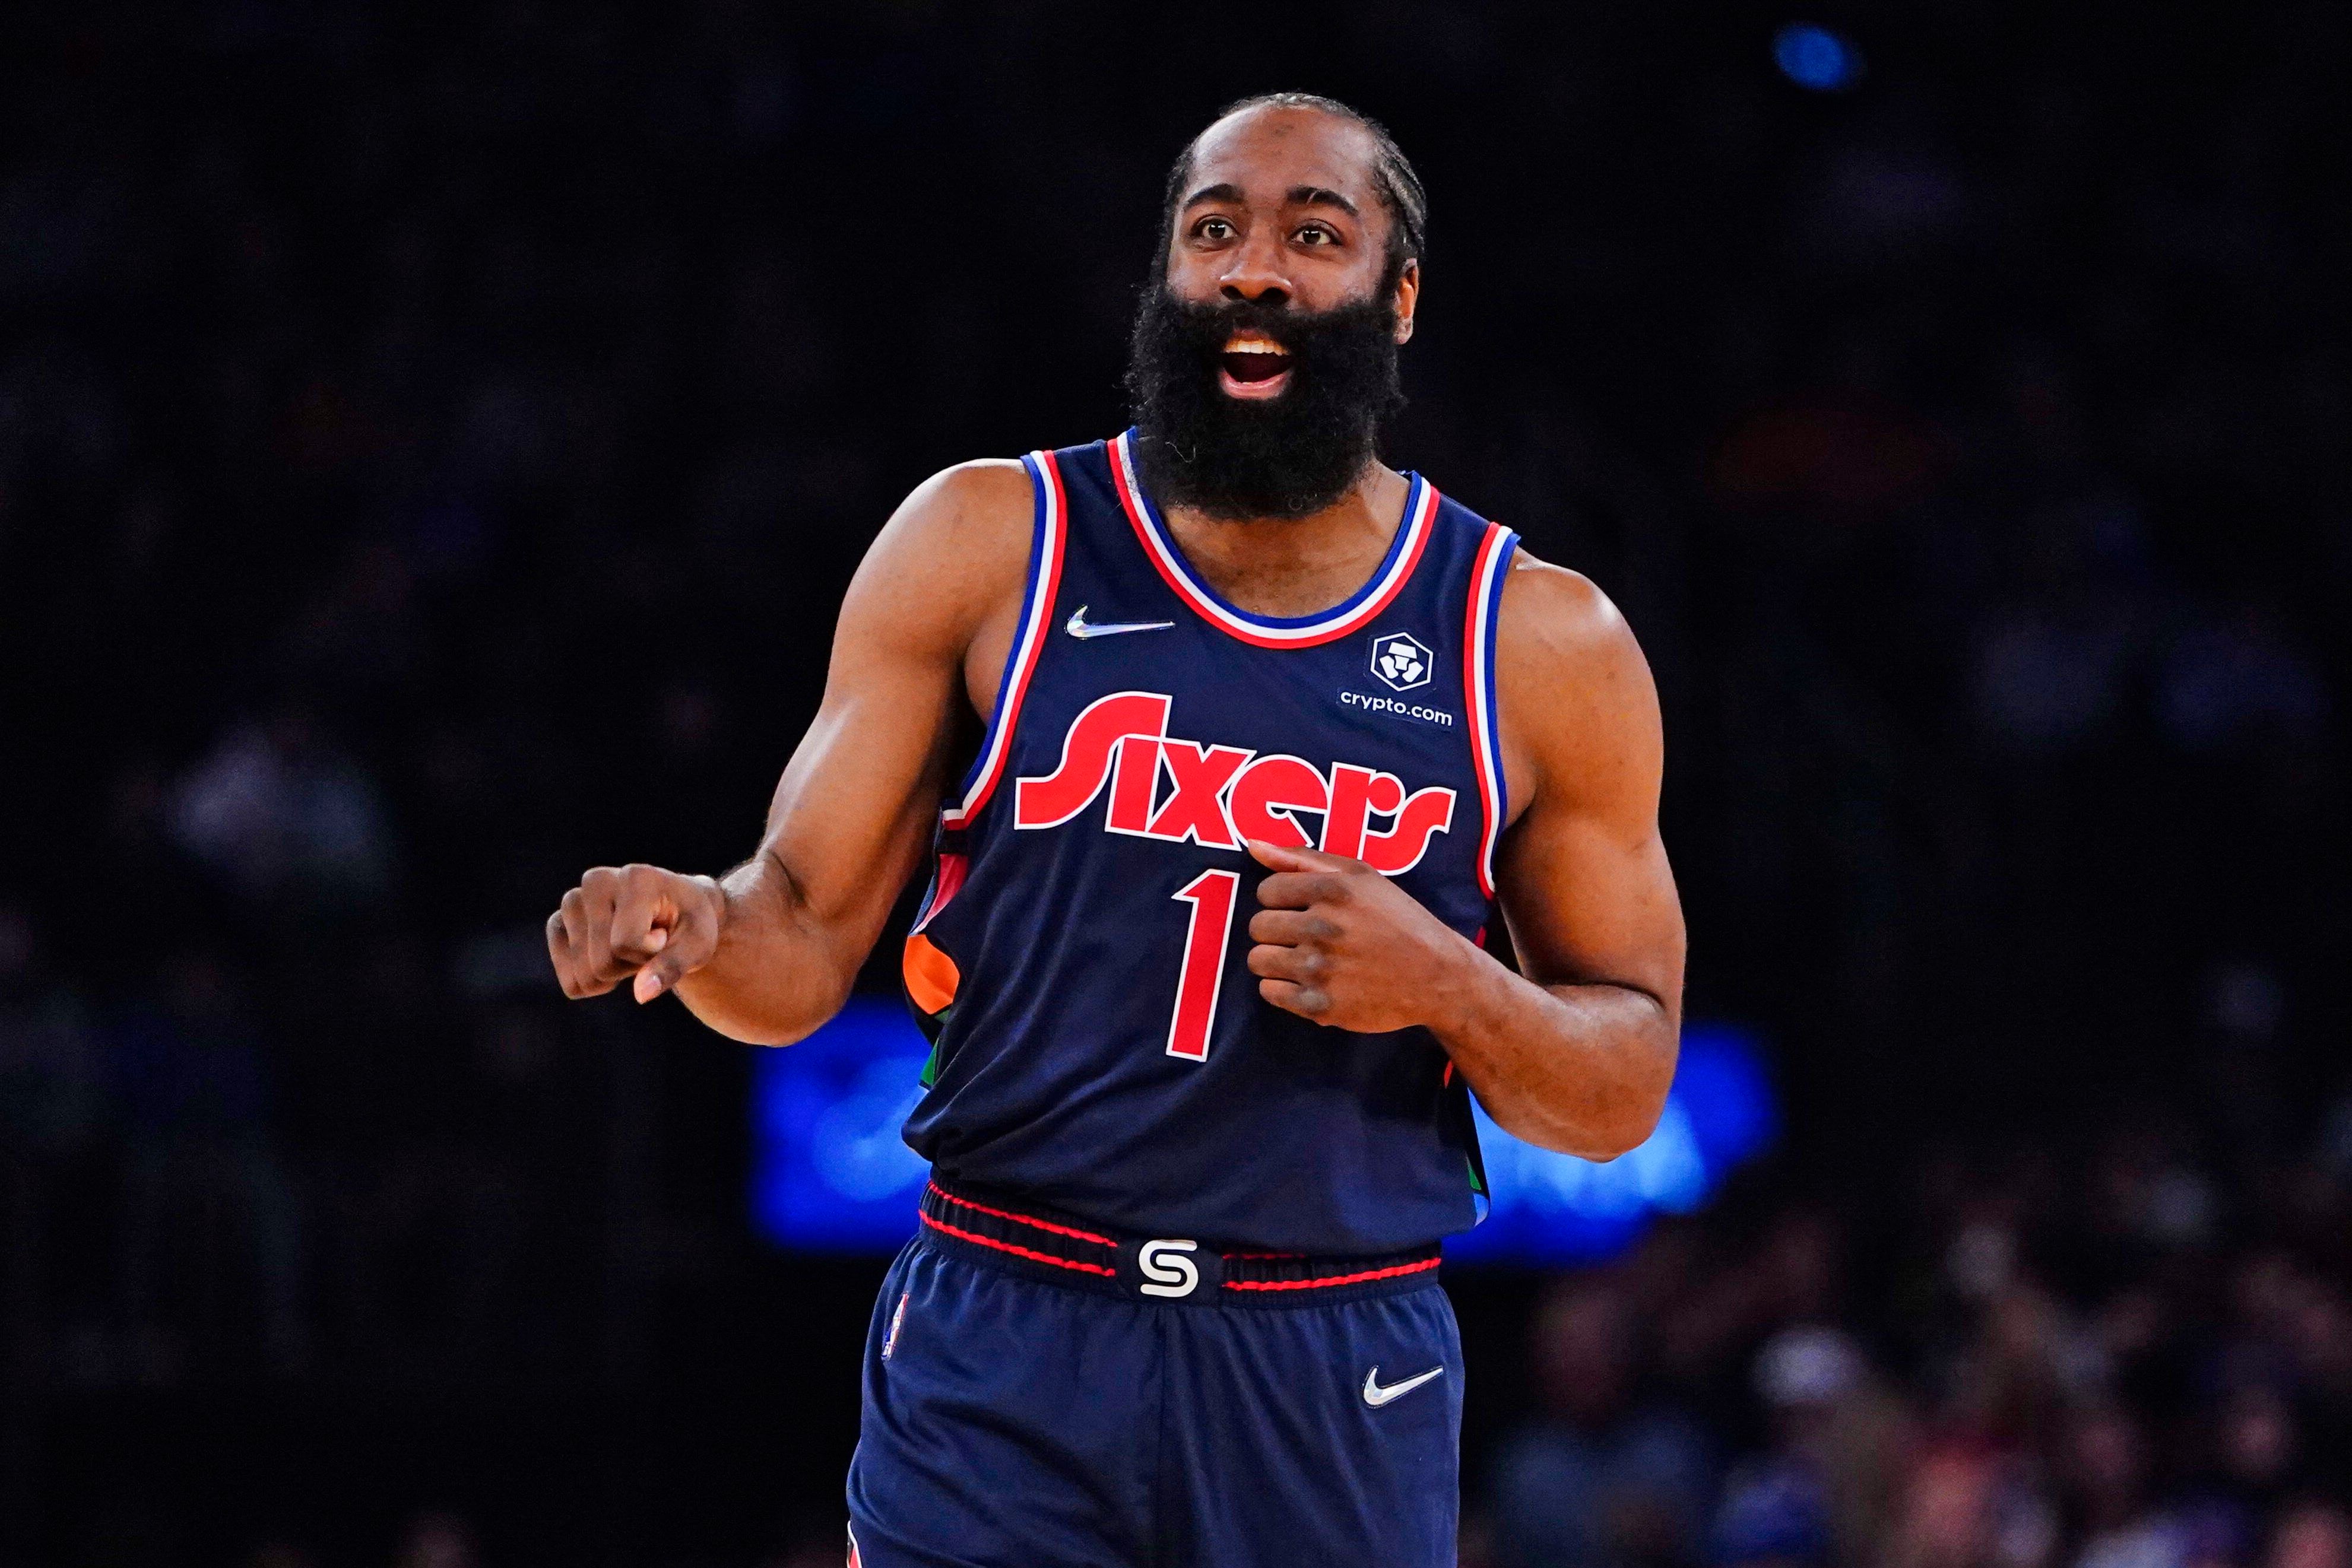 James Harden - Philadelphia 76ers - Game-Worn City Edition Jersey -  Christmas Day '22 - Recorded a 29-Point Double-Double - 2022-23 NBA Season